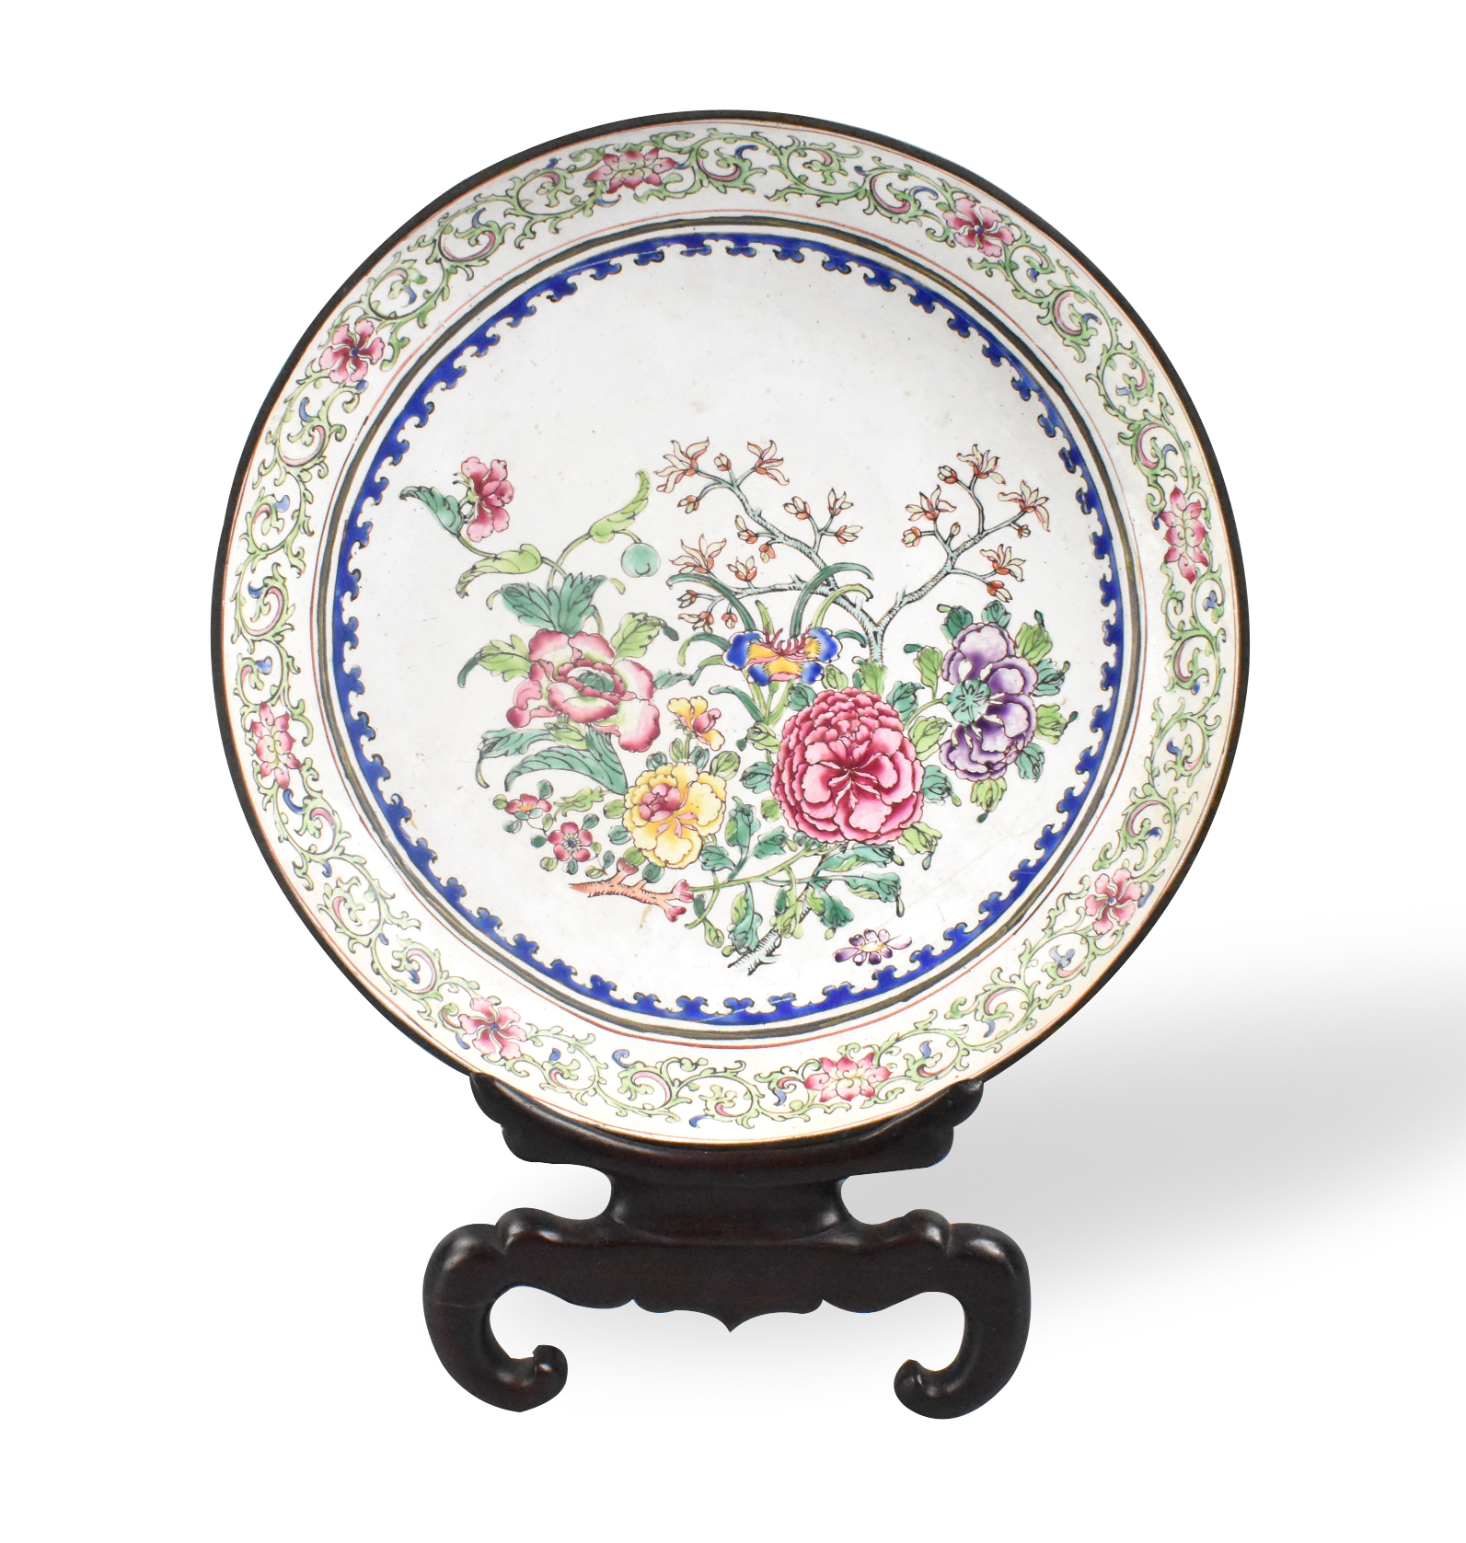 CHINESE ENAMEL FLORAL PLATE ON 301878